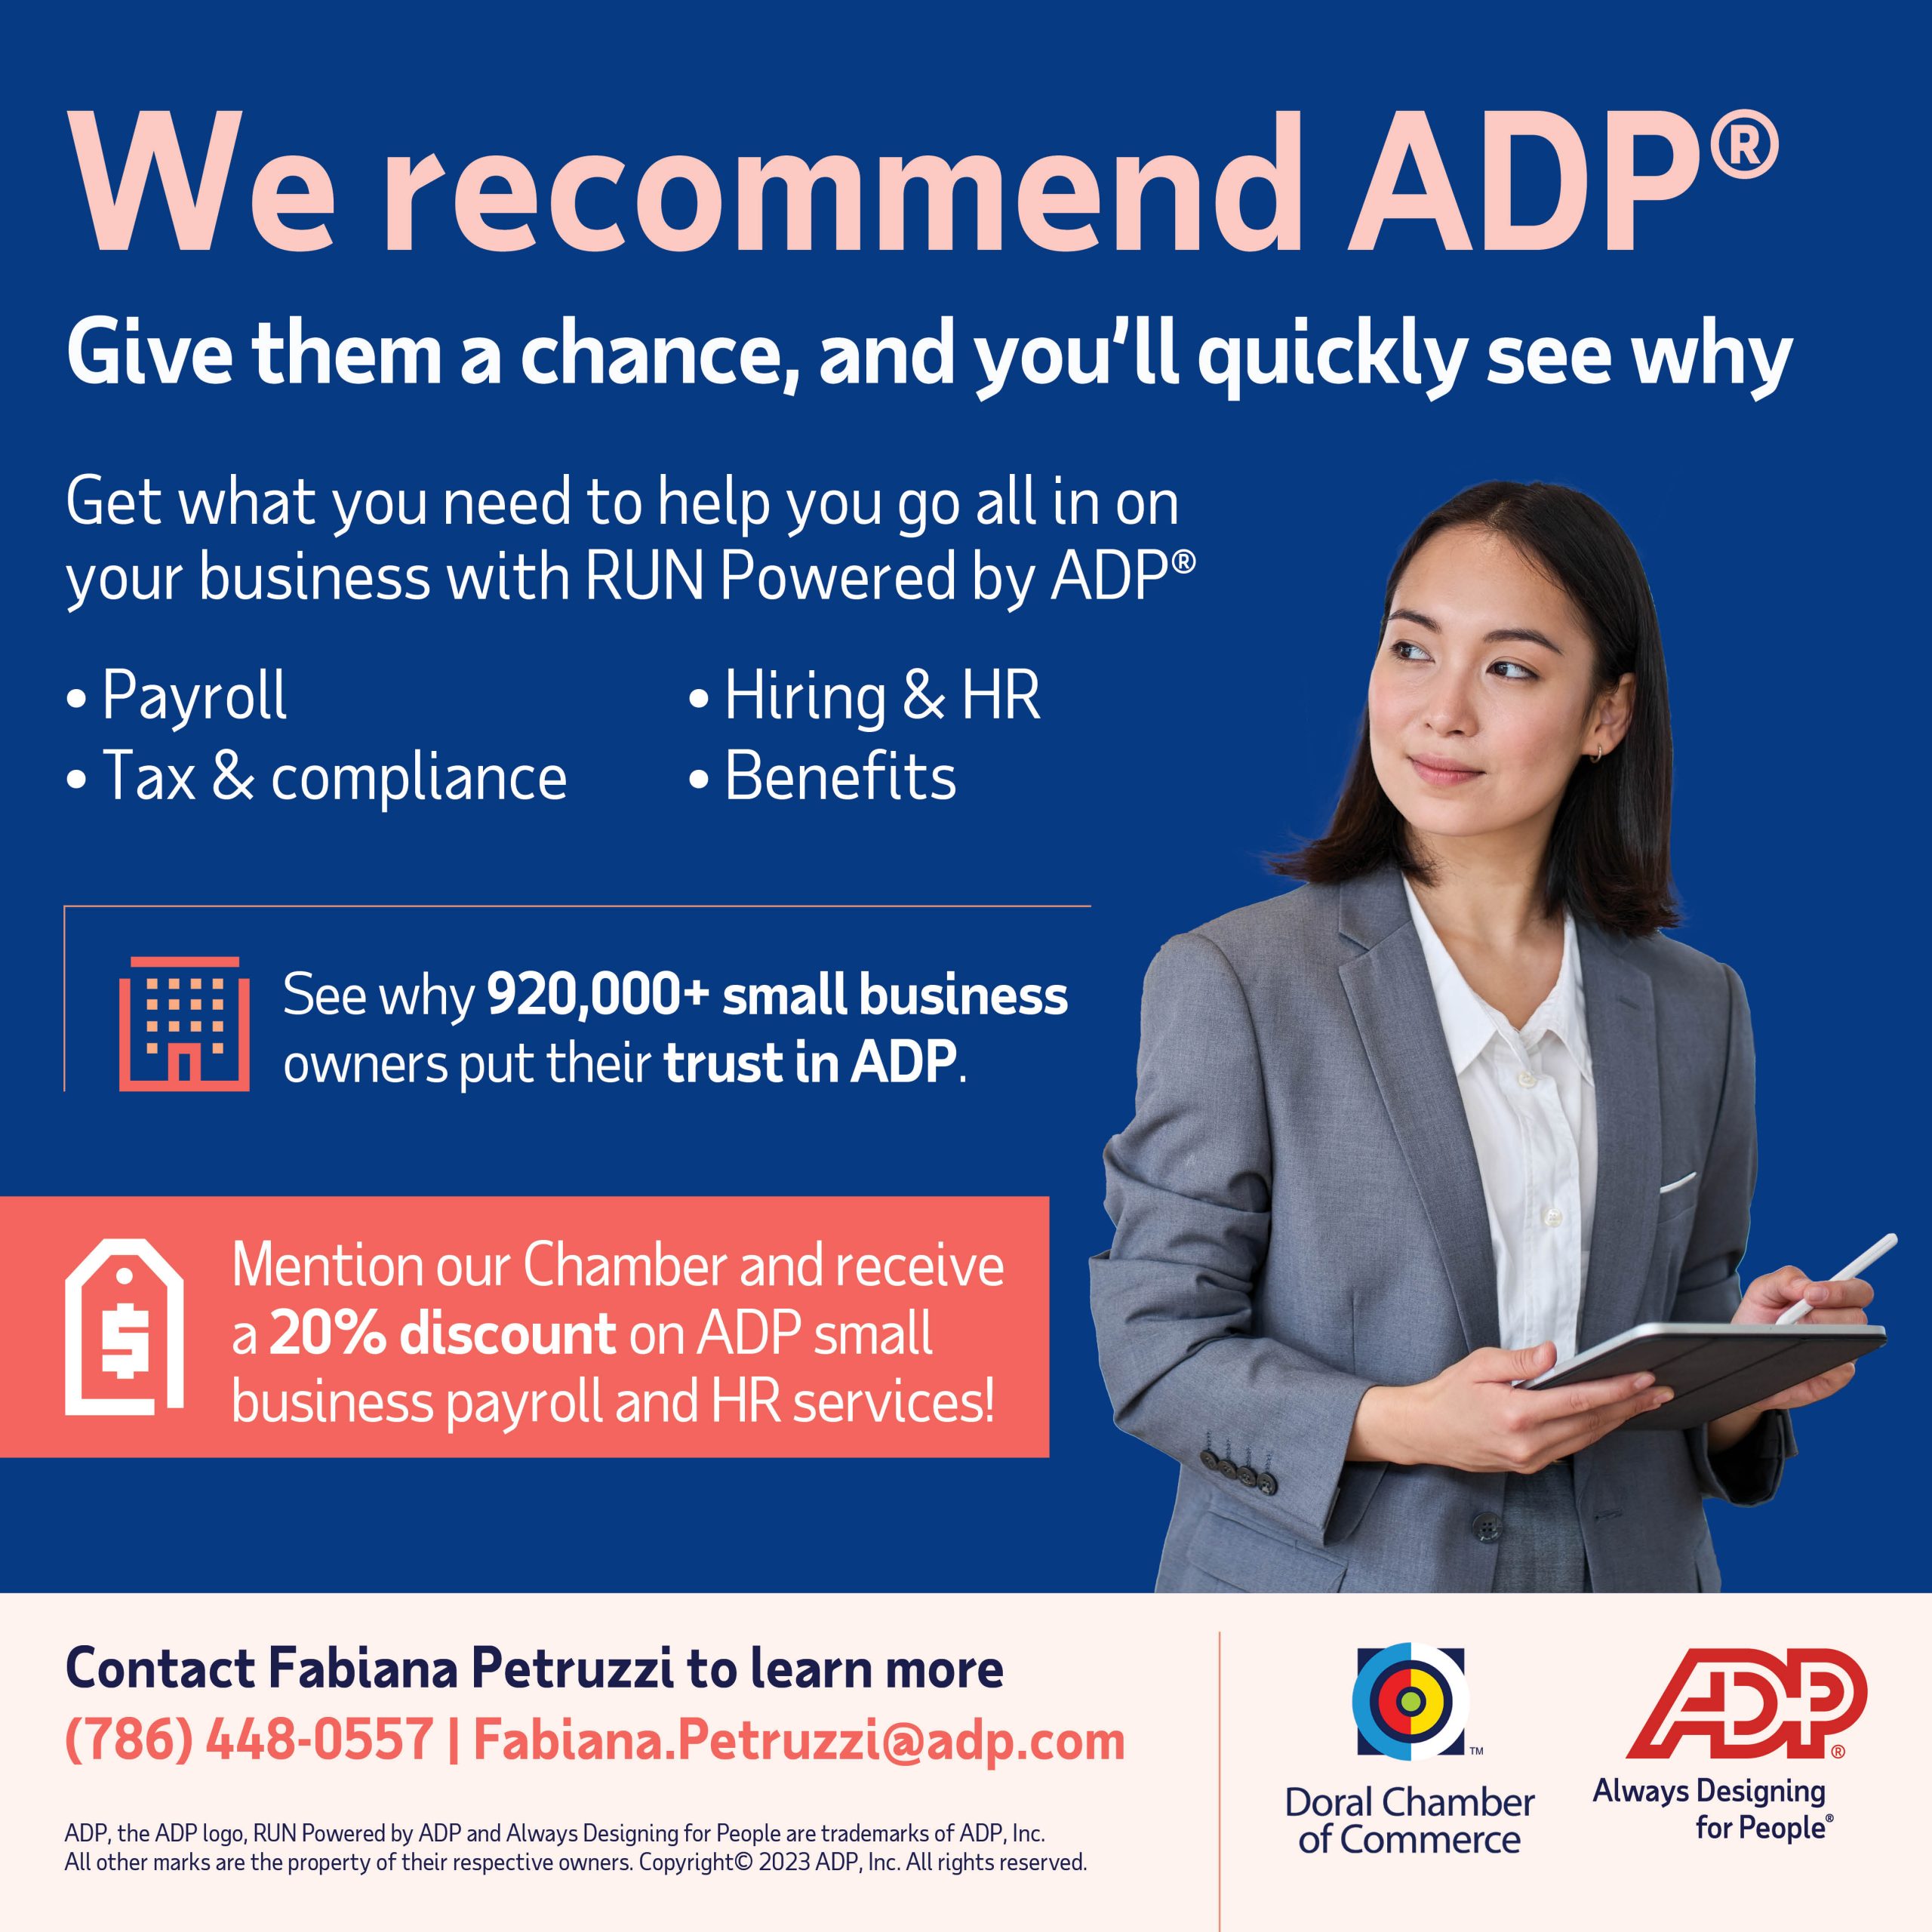 ADP We recommend ADP. ADP will get what you need to go all in on your business with RUN powered Flash Sale OFFER: An ADDITIONAL 15% to our 20% chamber members discount + 2 months FREE. Please call us at 786-448-0557 or send us an email at fabiana.petruzzi@adp.com to become eligible for this discount.